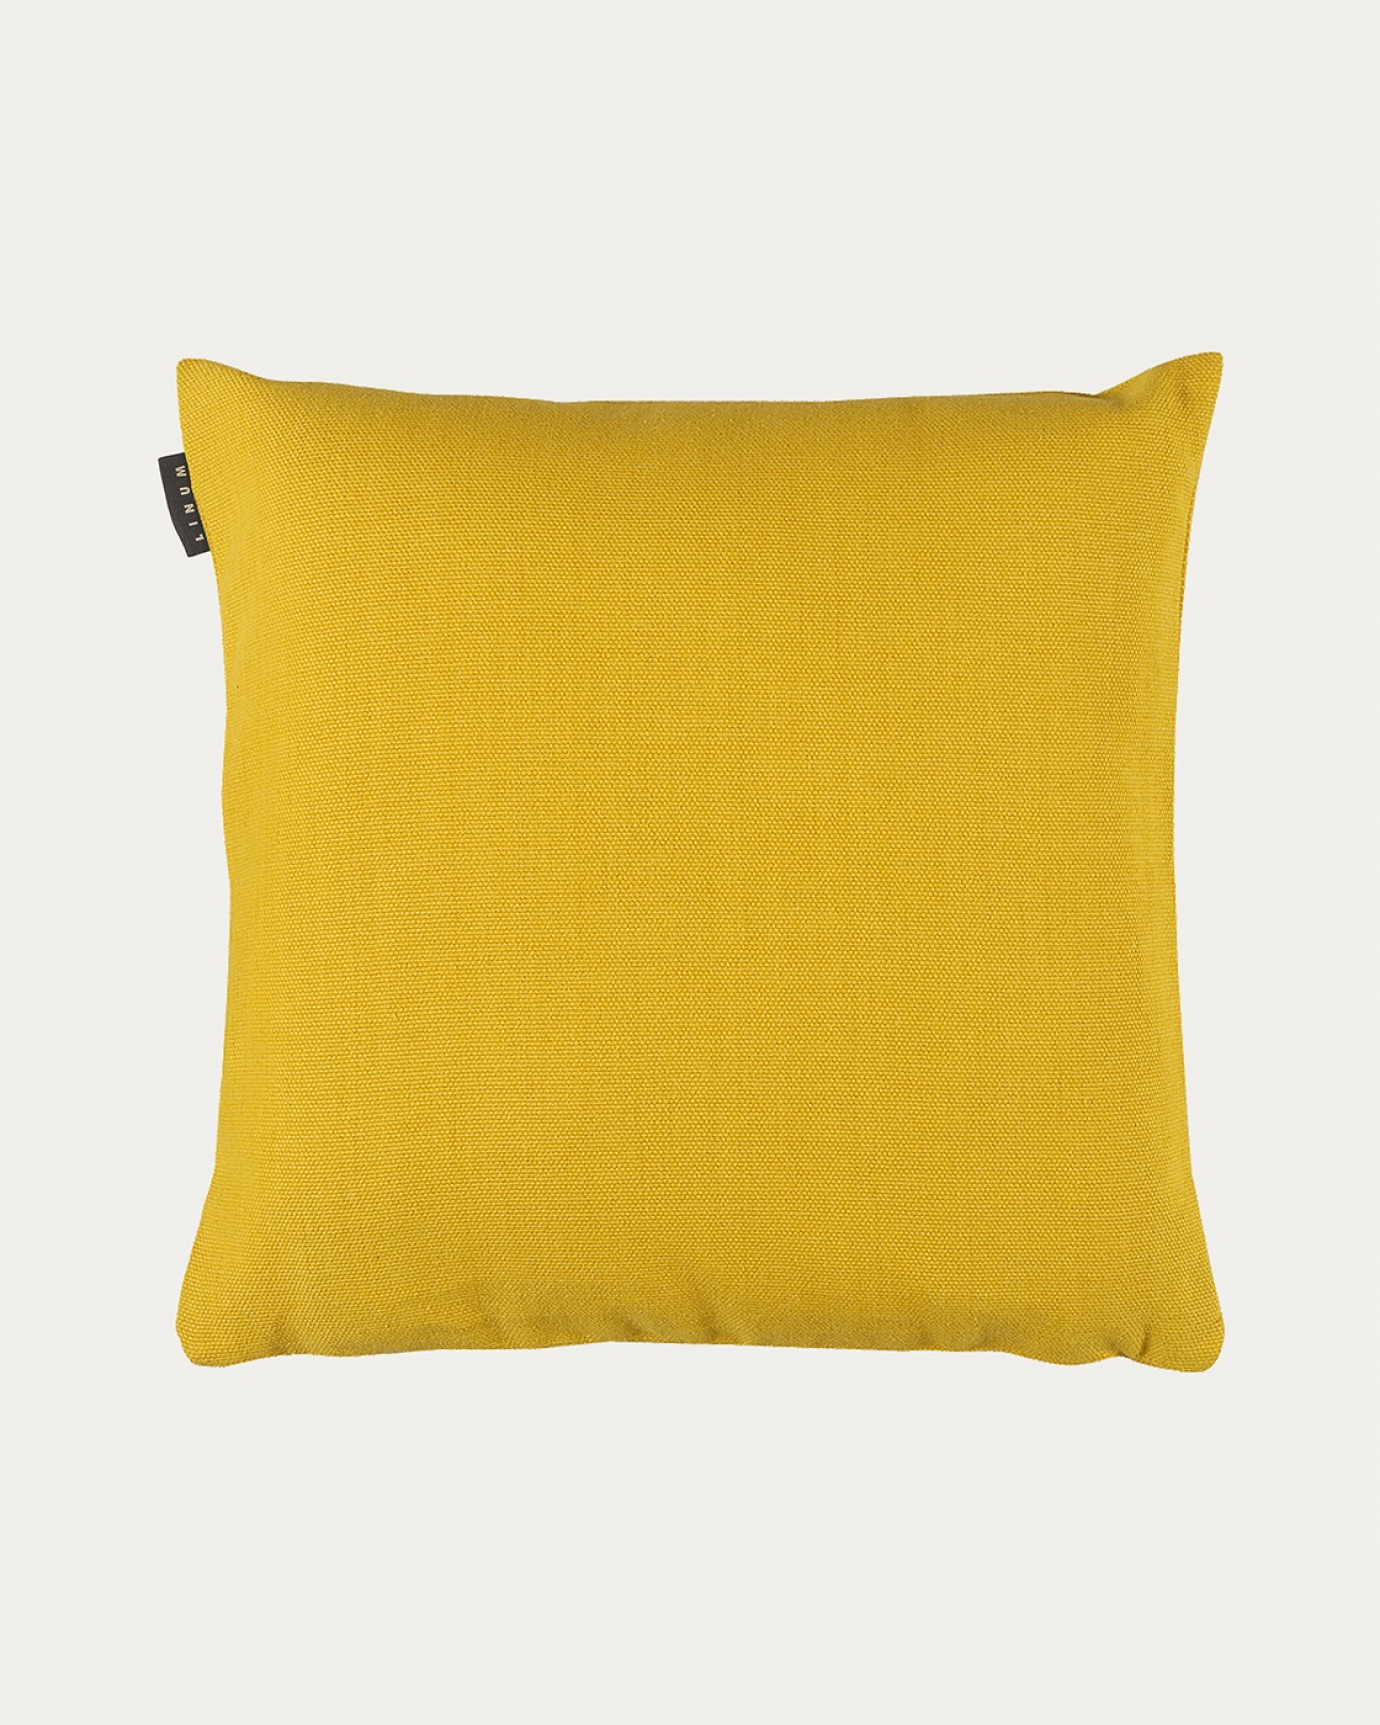 Product image tangerine yellow PEPPER cushion cover made of soft cotton from LINUM DESIGN. Easy to wash and durable for generations. Size 50x50 cm.